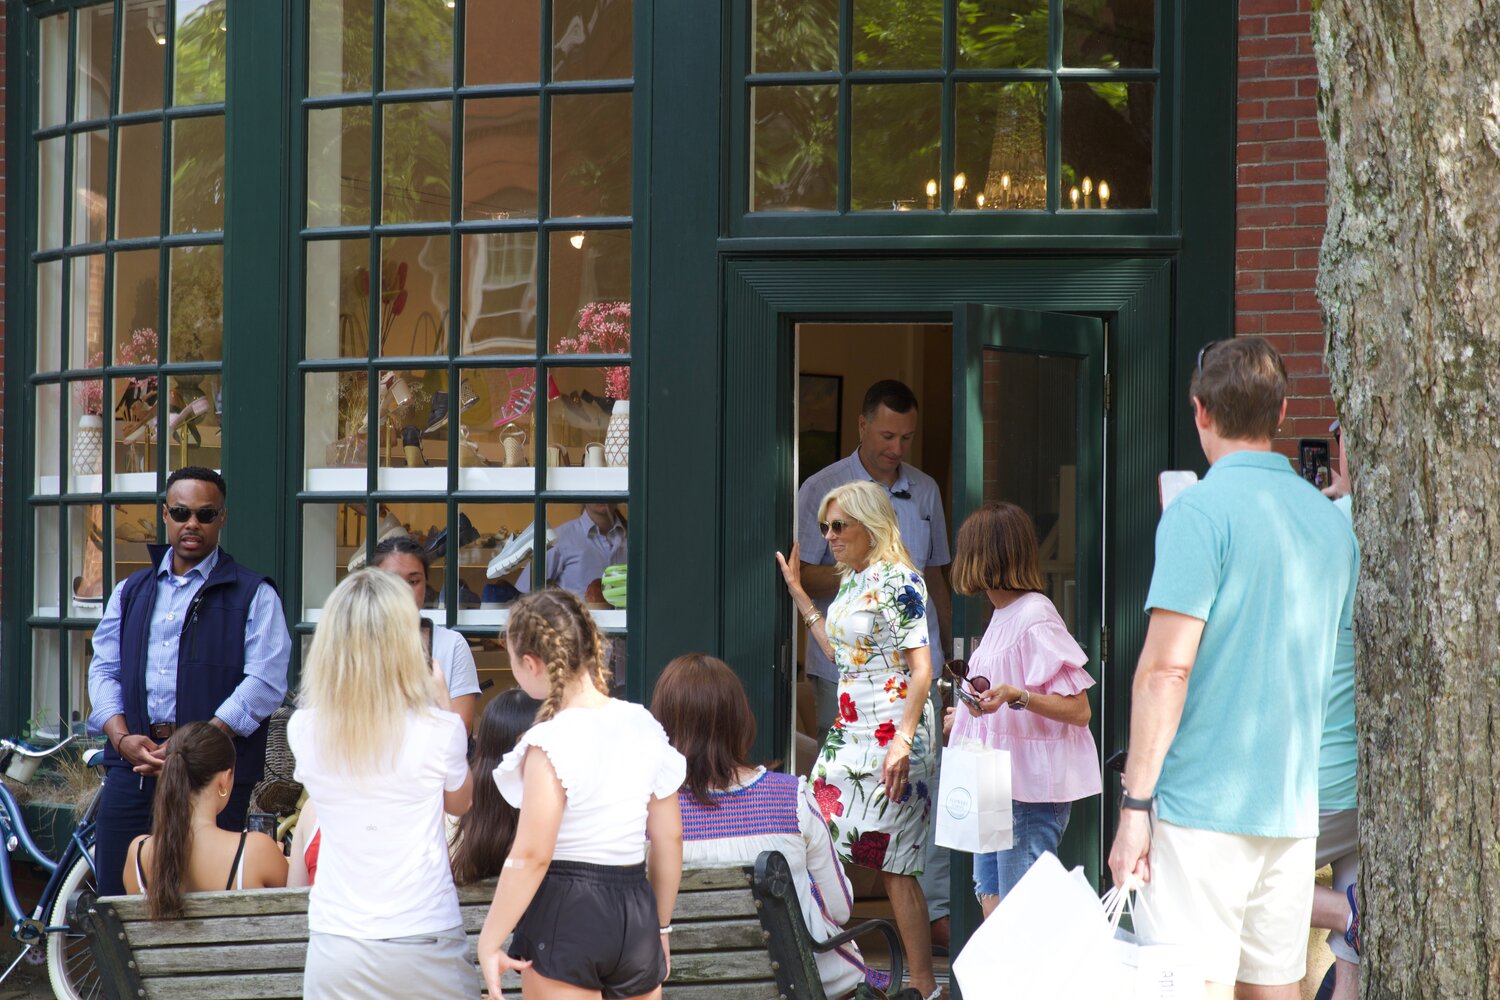 First lady Jill Biden during her visit to downtown Nantucket Saturday.